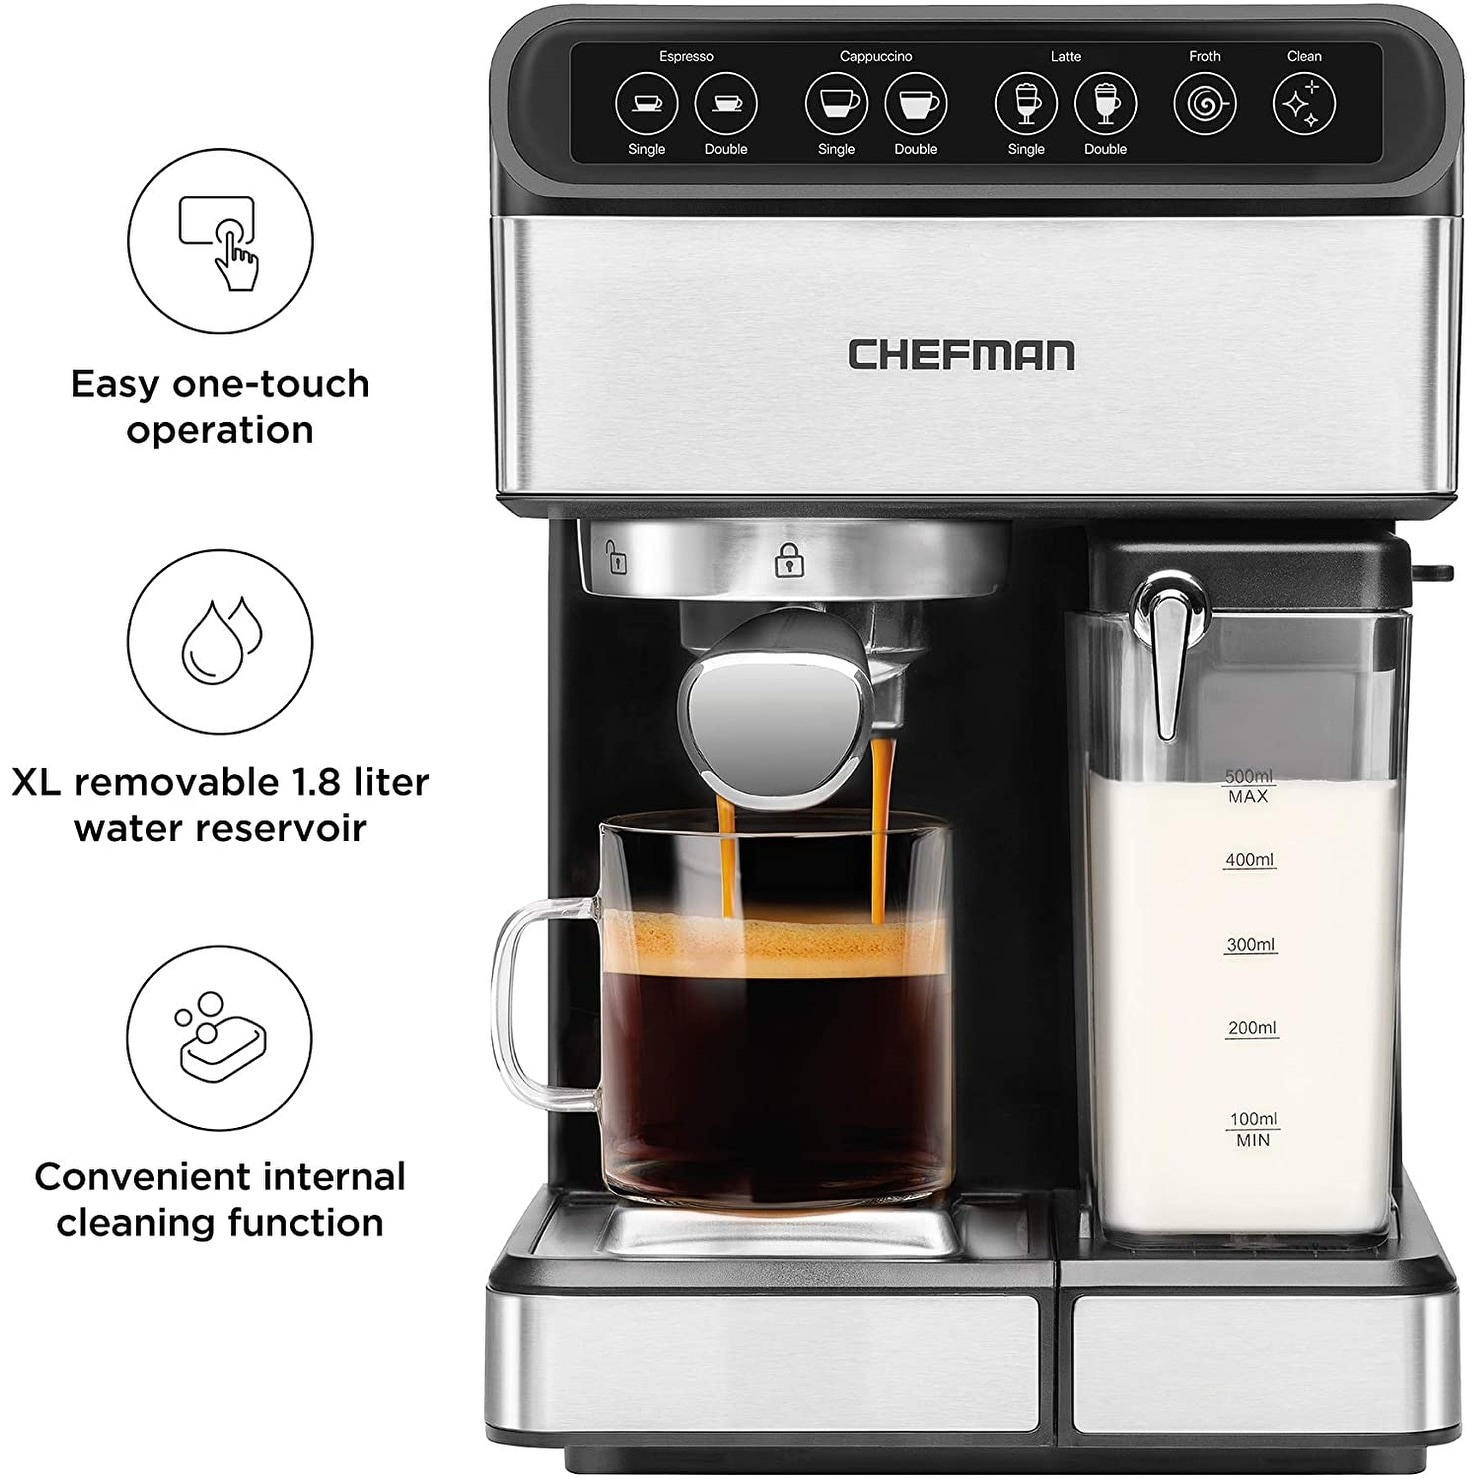 Chefman 6-in-1 Espresso Machine with Steamer, Automatic One-Touch